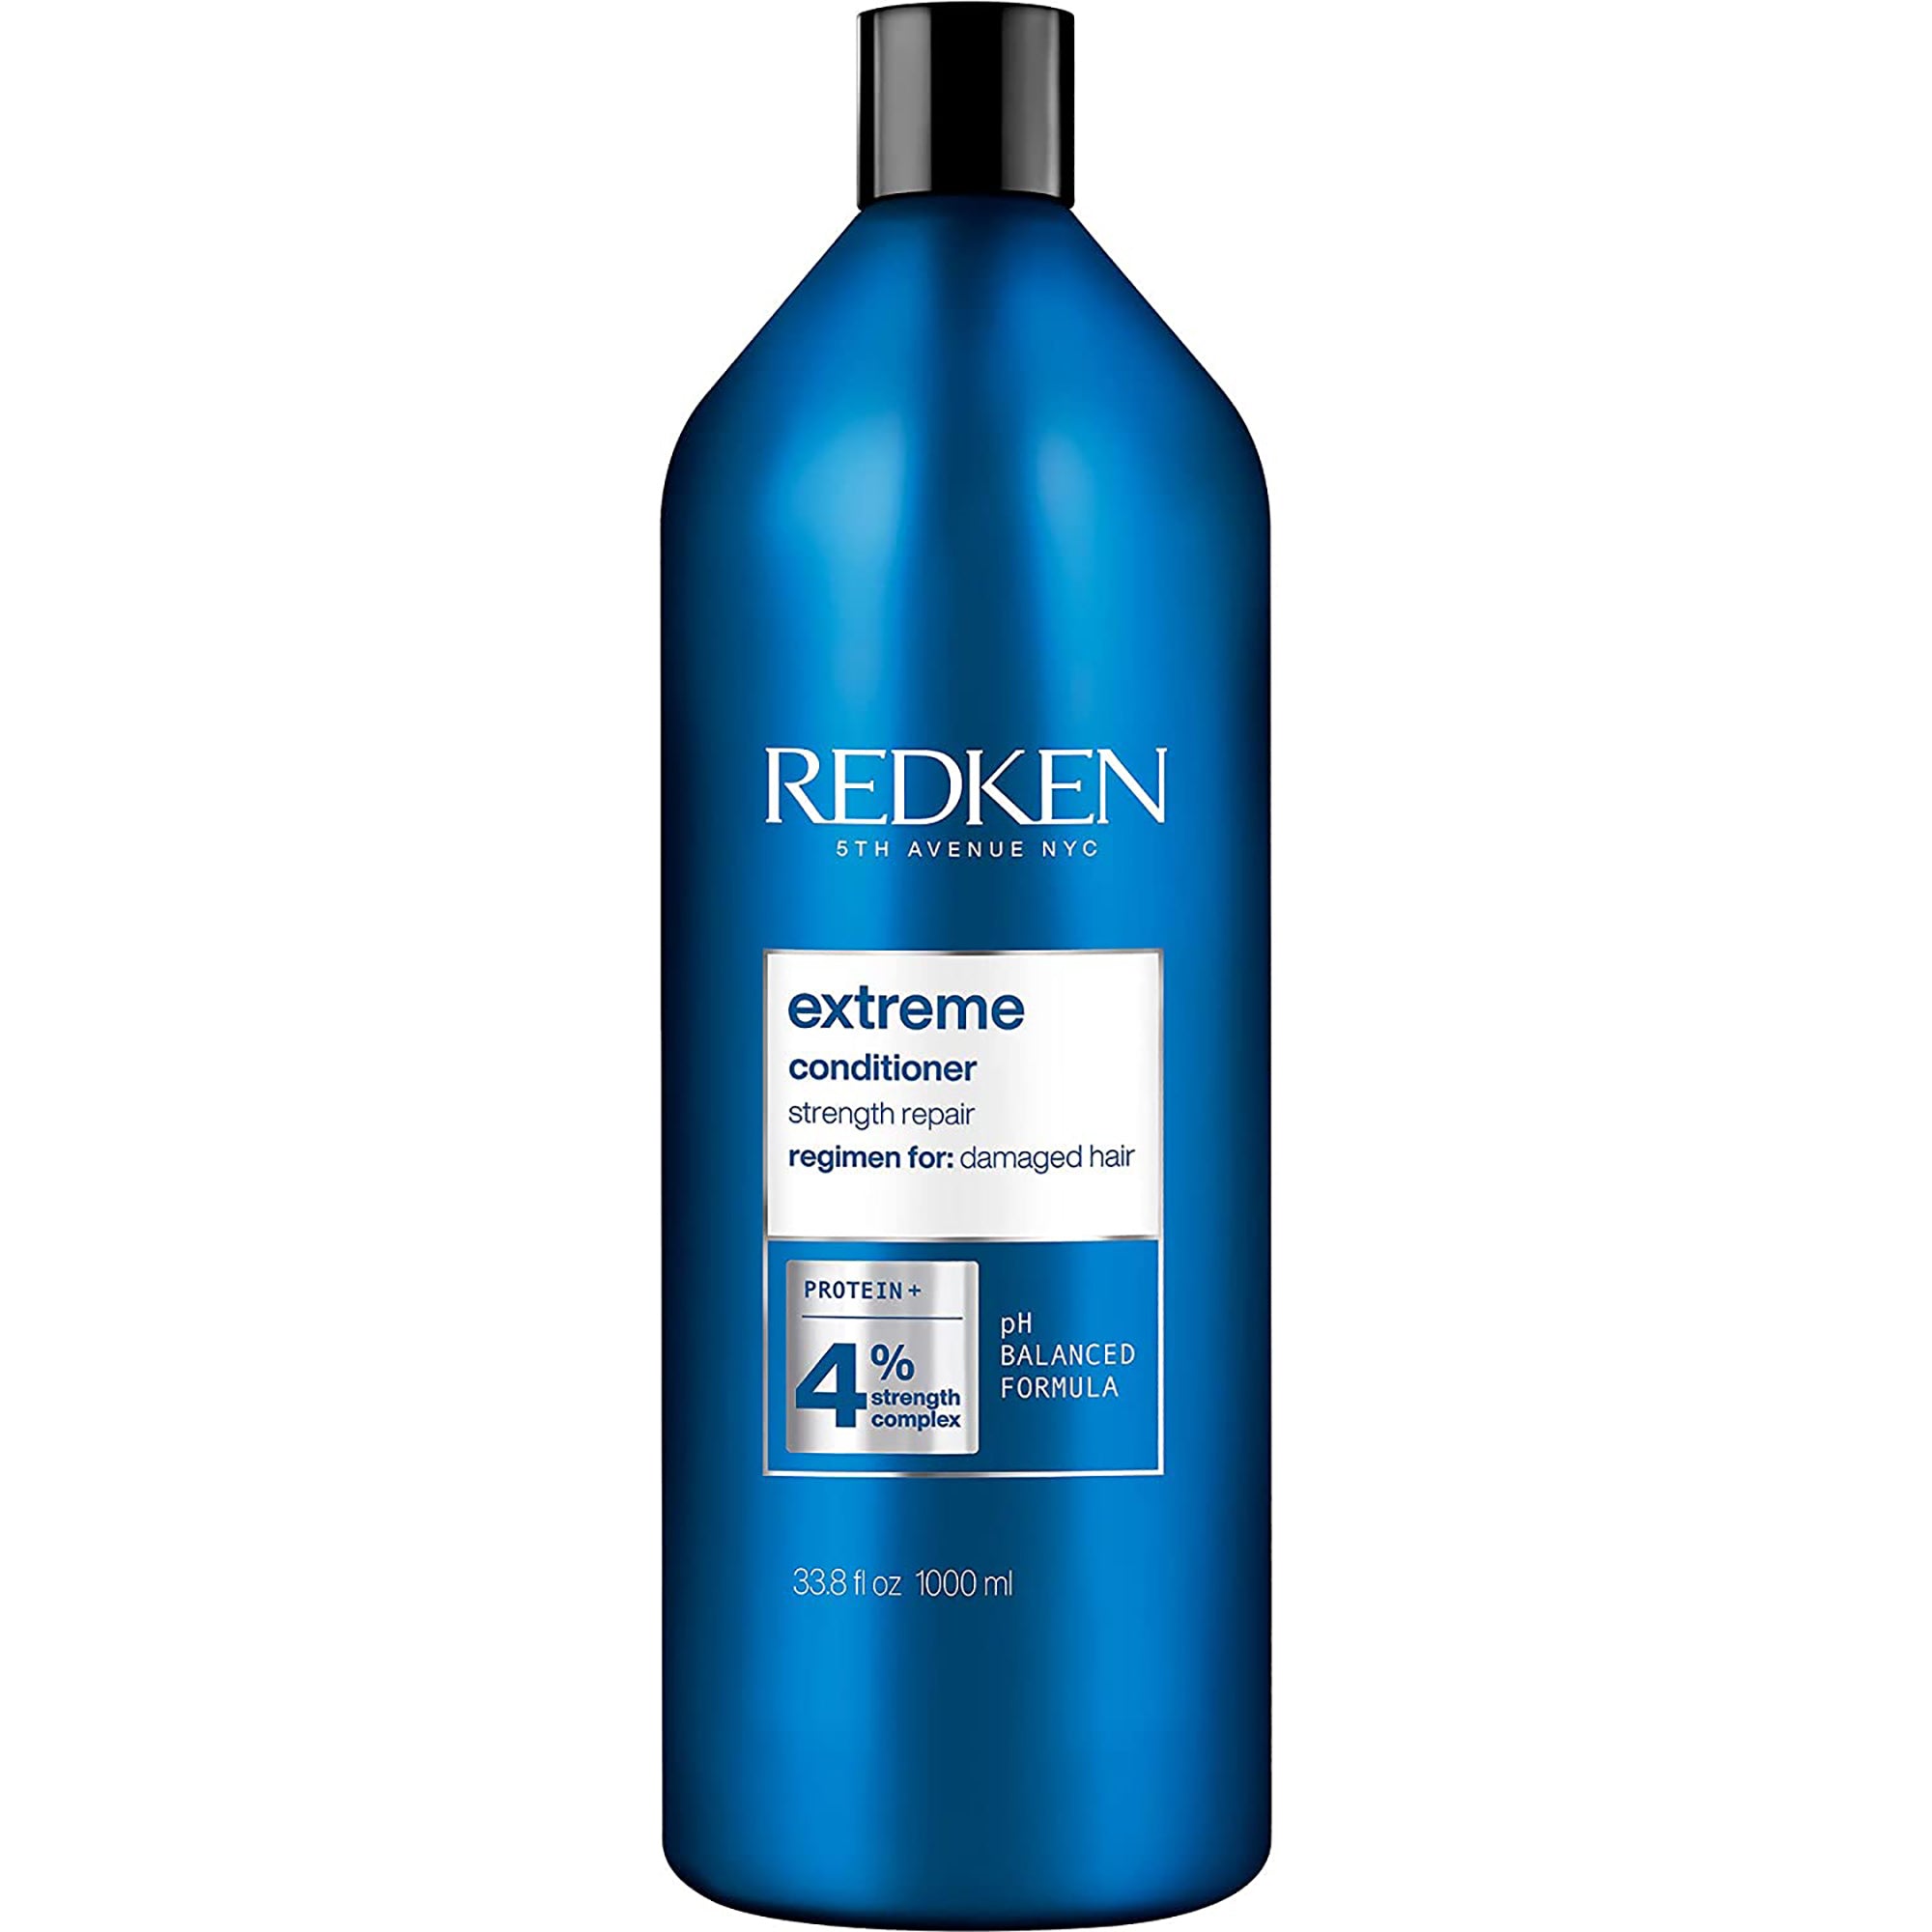 Redken Extreme Shampoo and Conditioner Liter Duo ($100 Value) / DUO